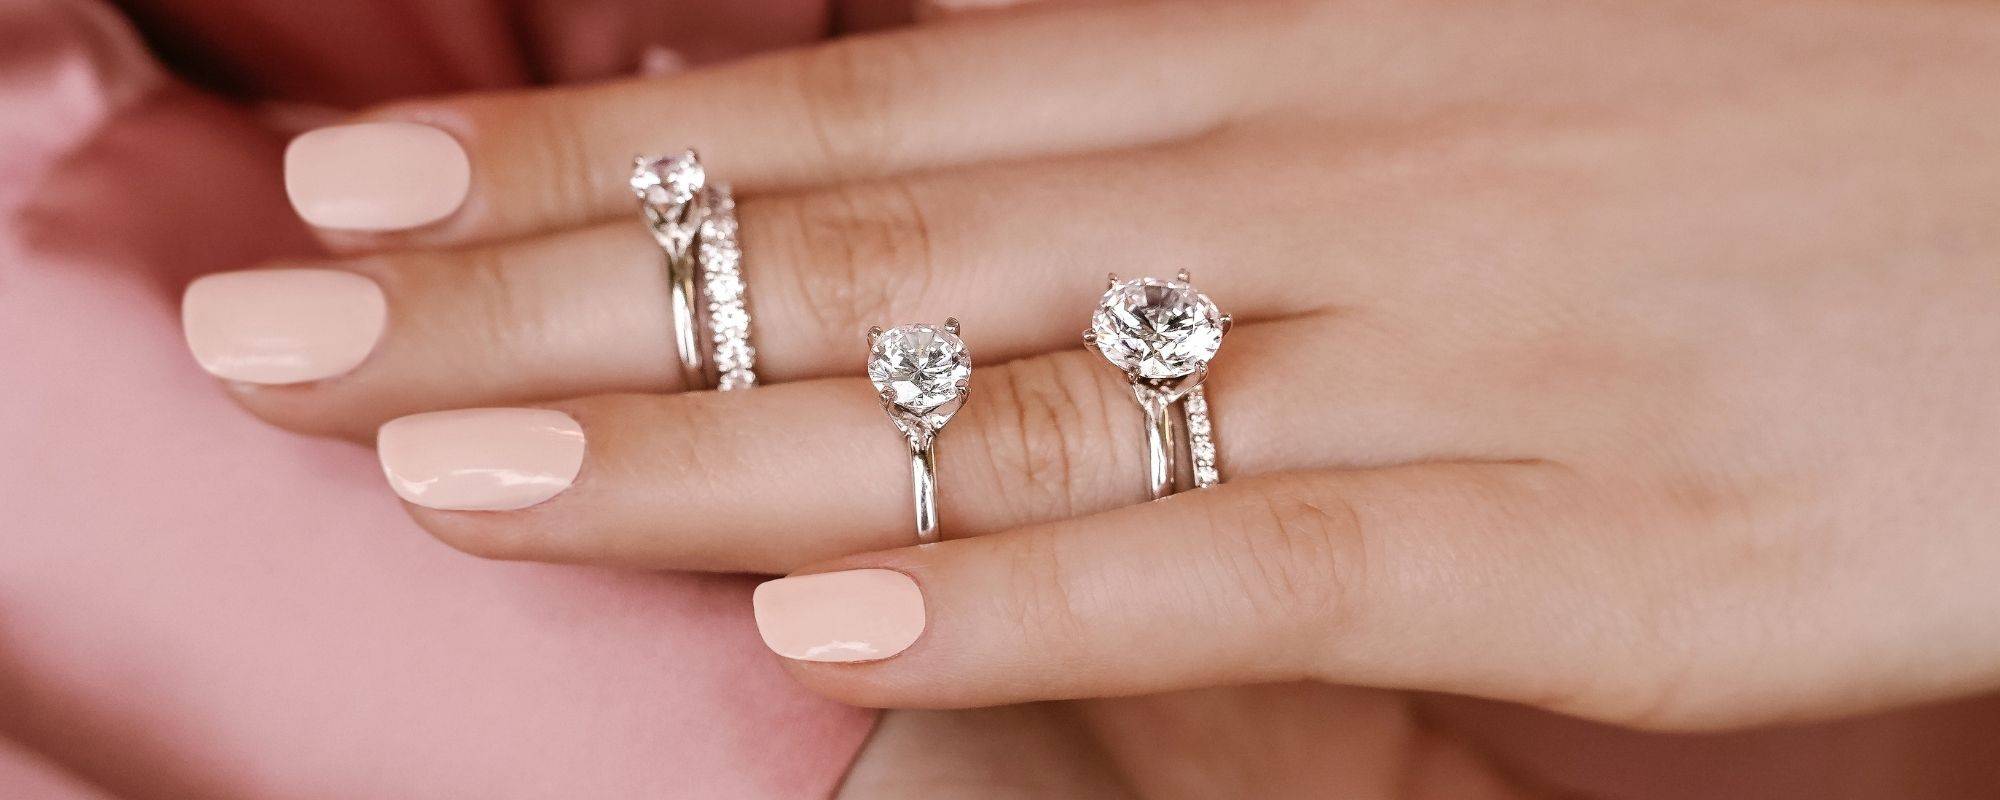 The Truth About Ethical Jewelry Companies: Fake vs Real